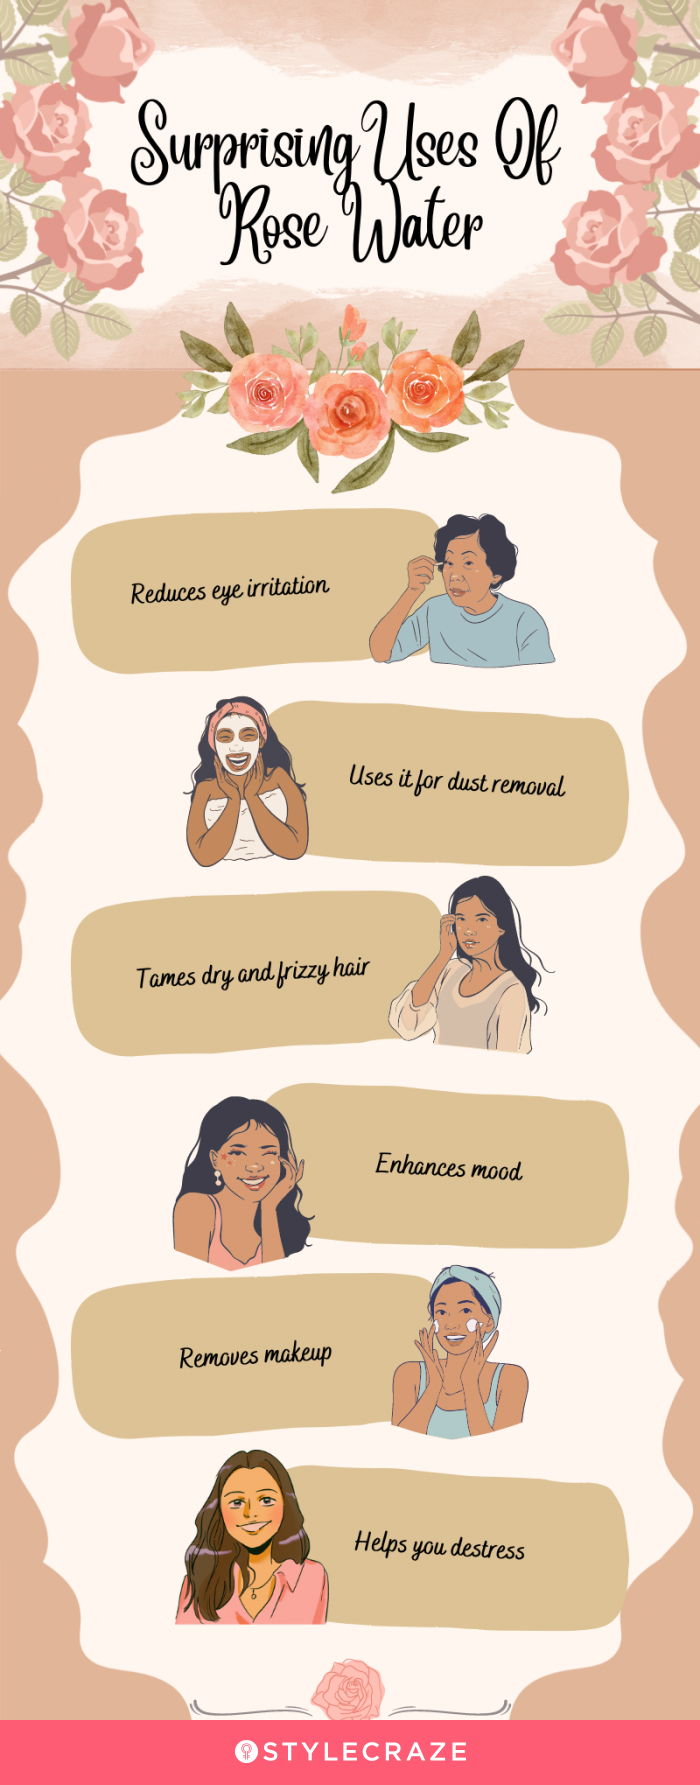 rose water benefits for face [infographic]